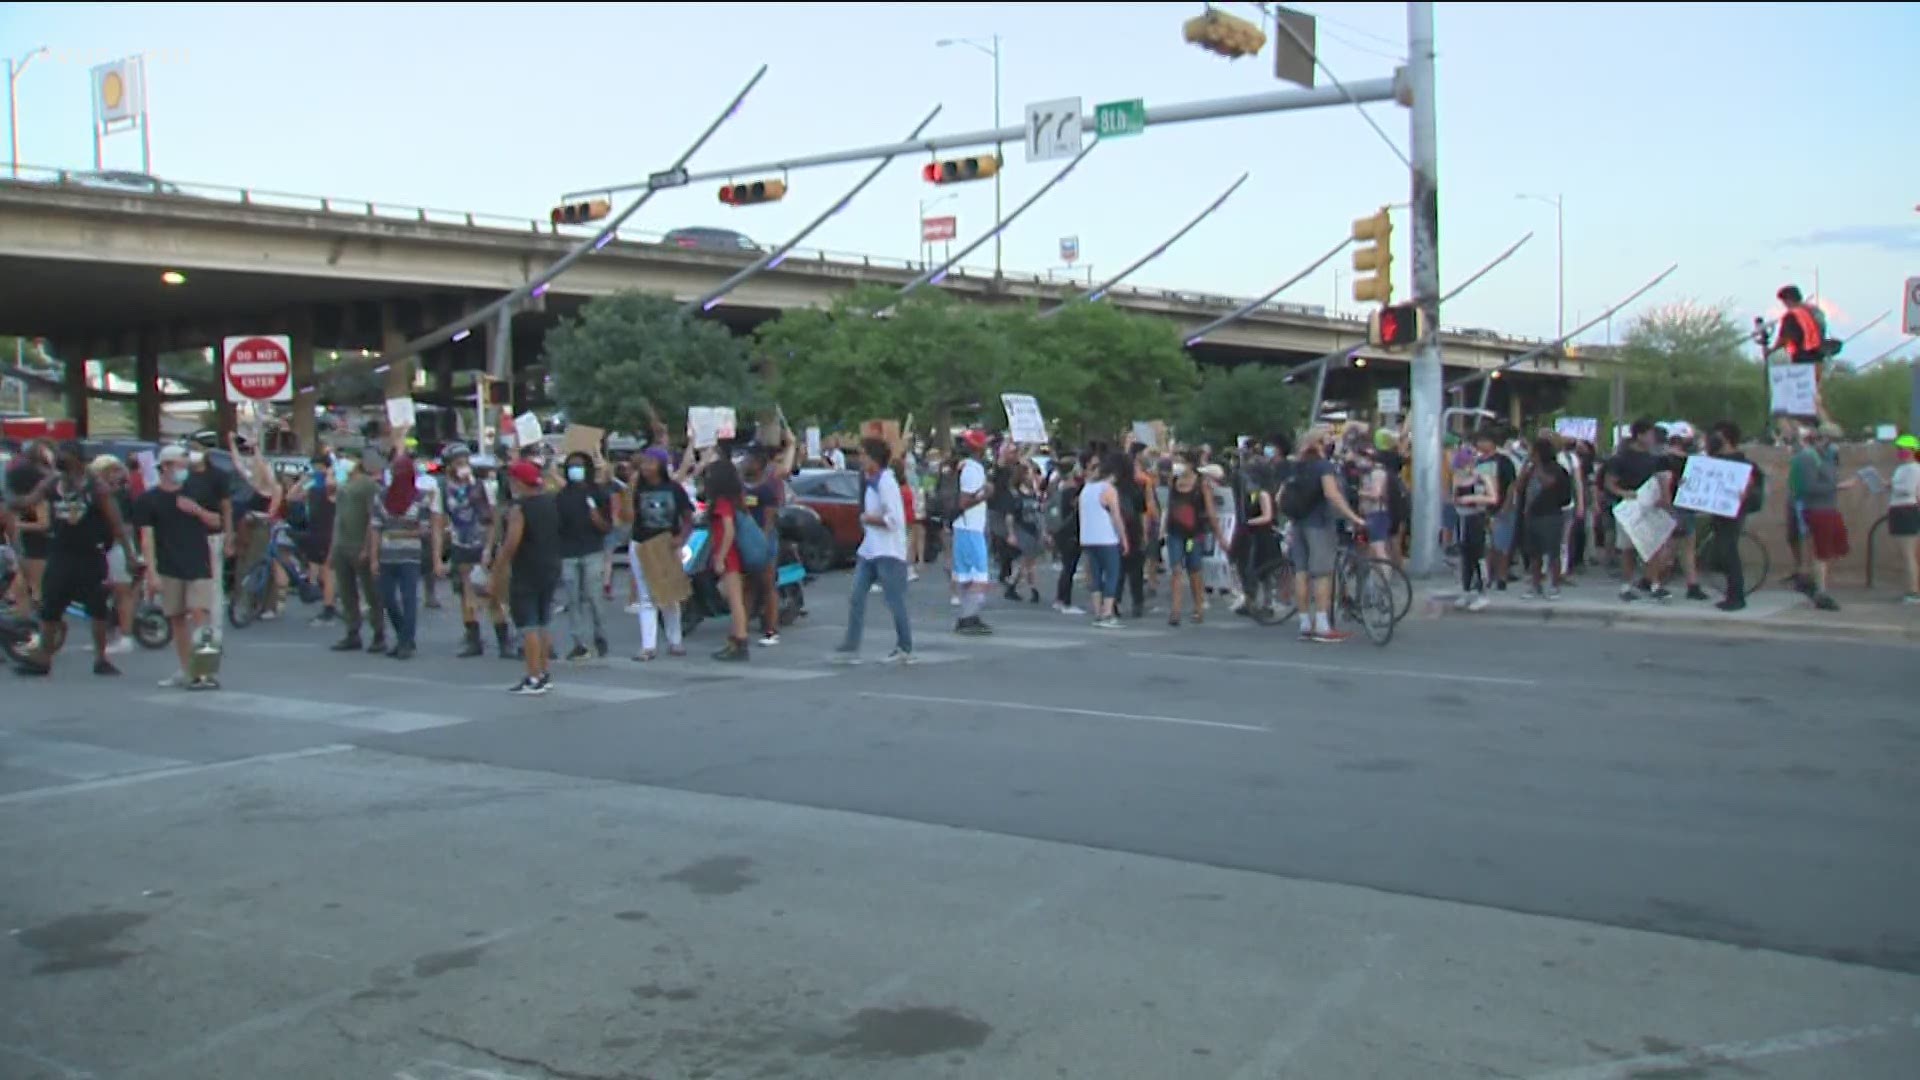 Protesters have been calling for the resignation of Austin Police Chief Brian Manley.